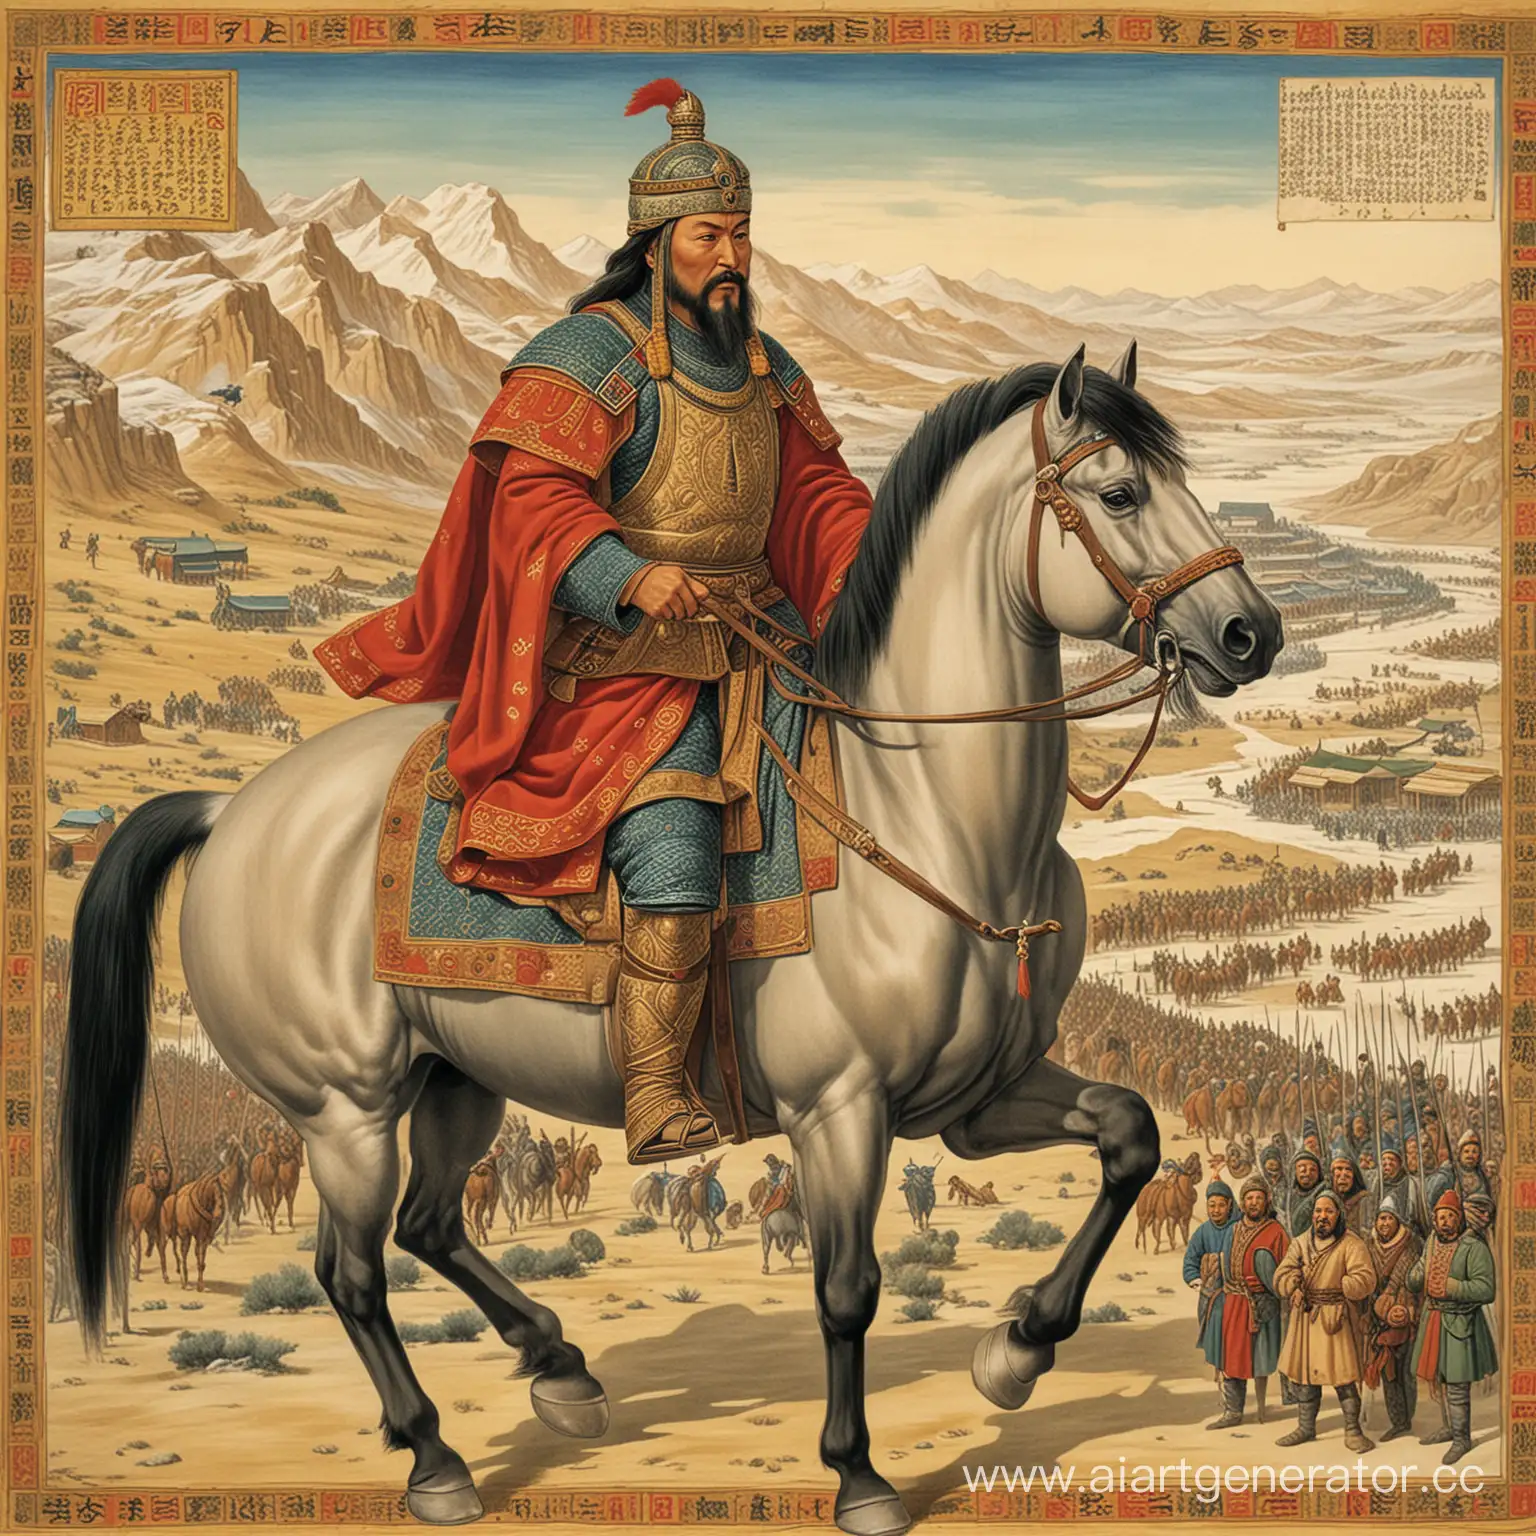 Genghis-Khans-Mighty-Mongol-Empire